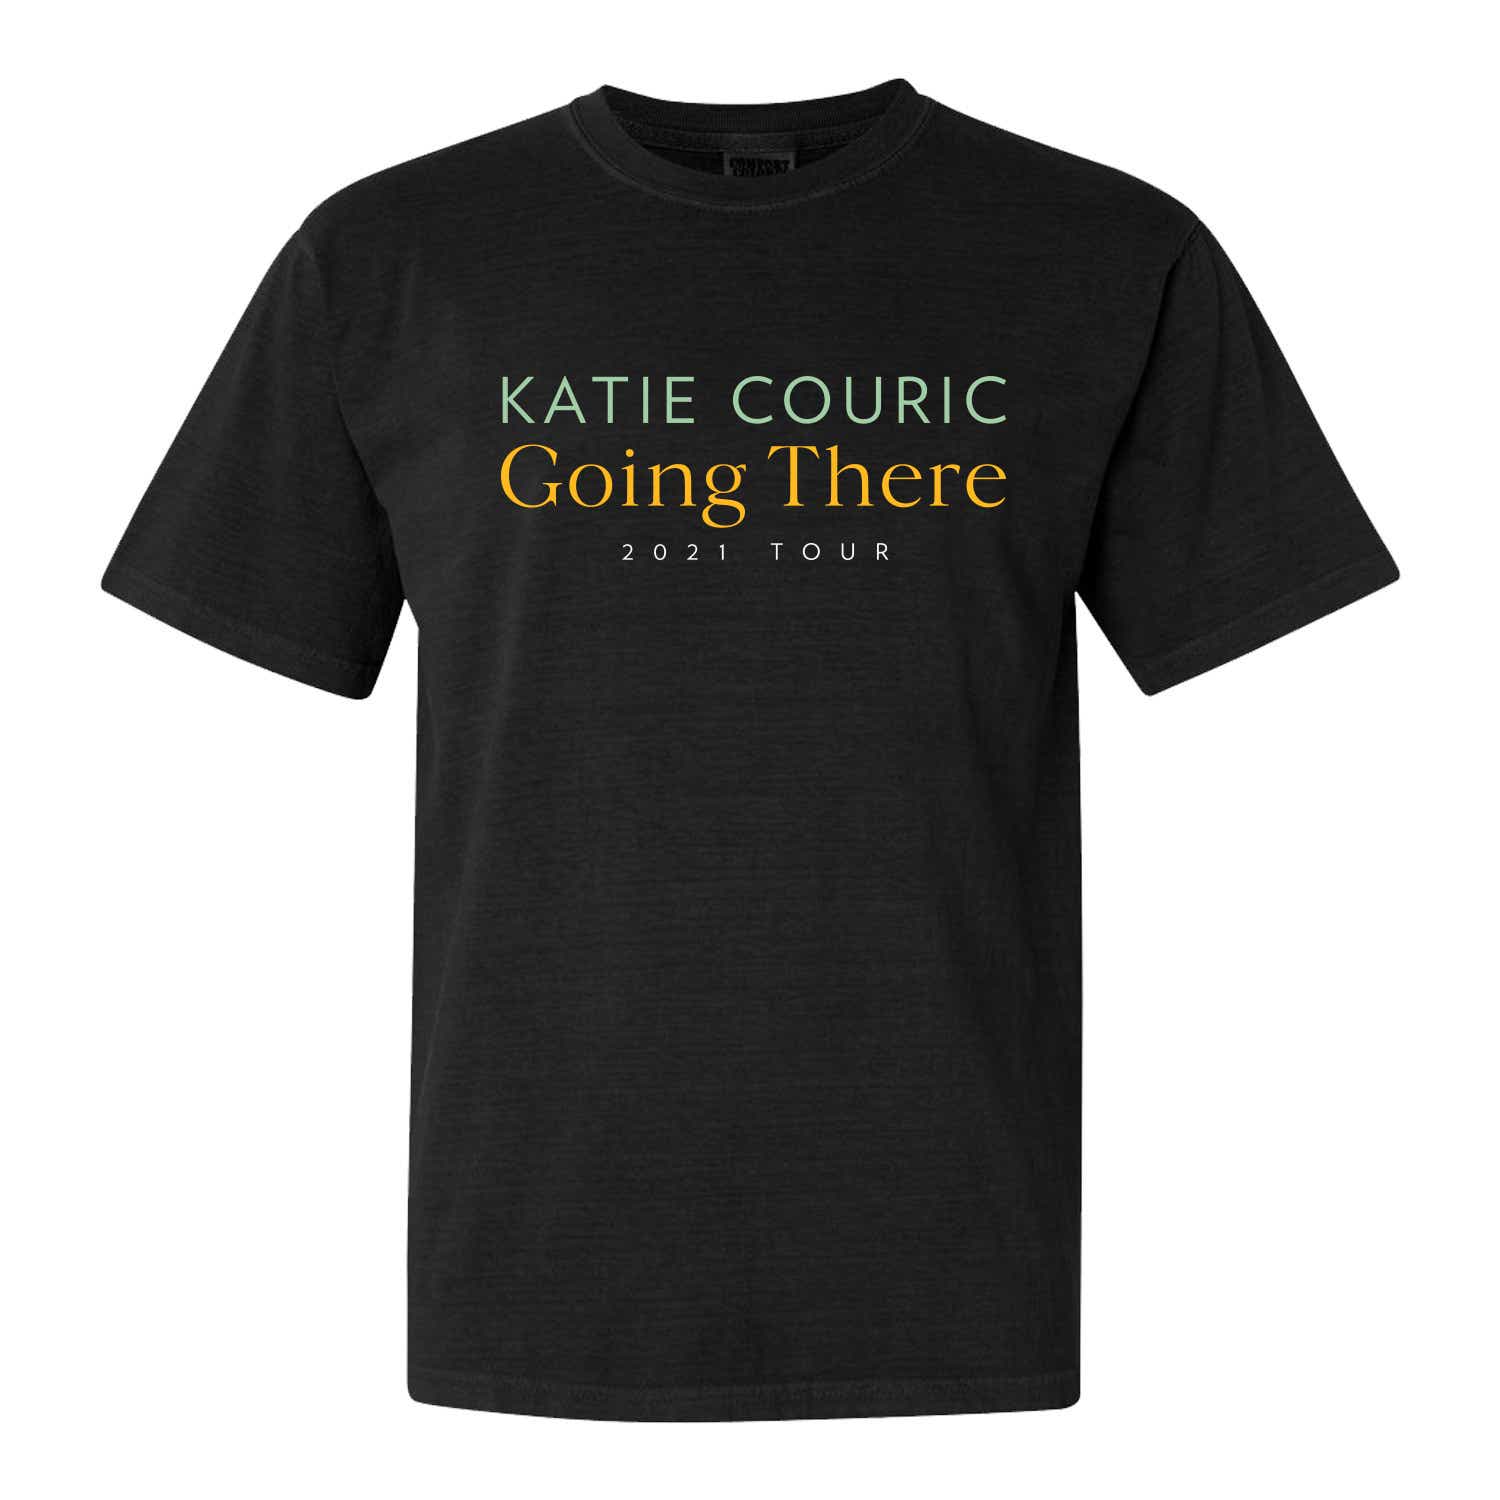 Going There Tour Tee, Black